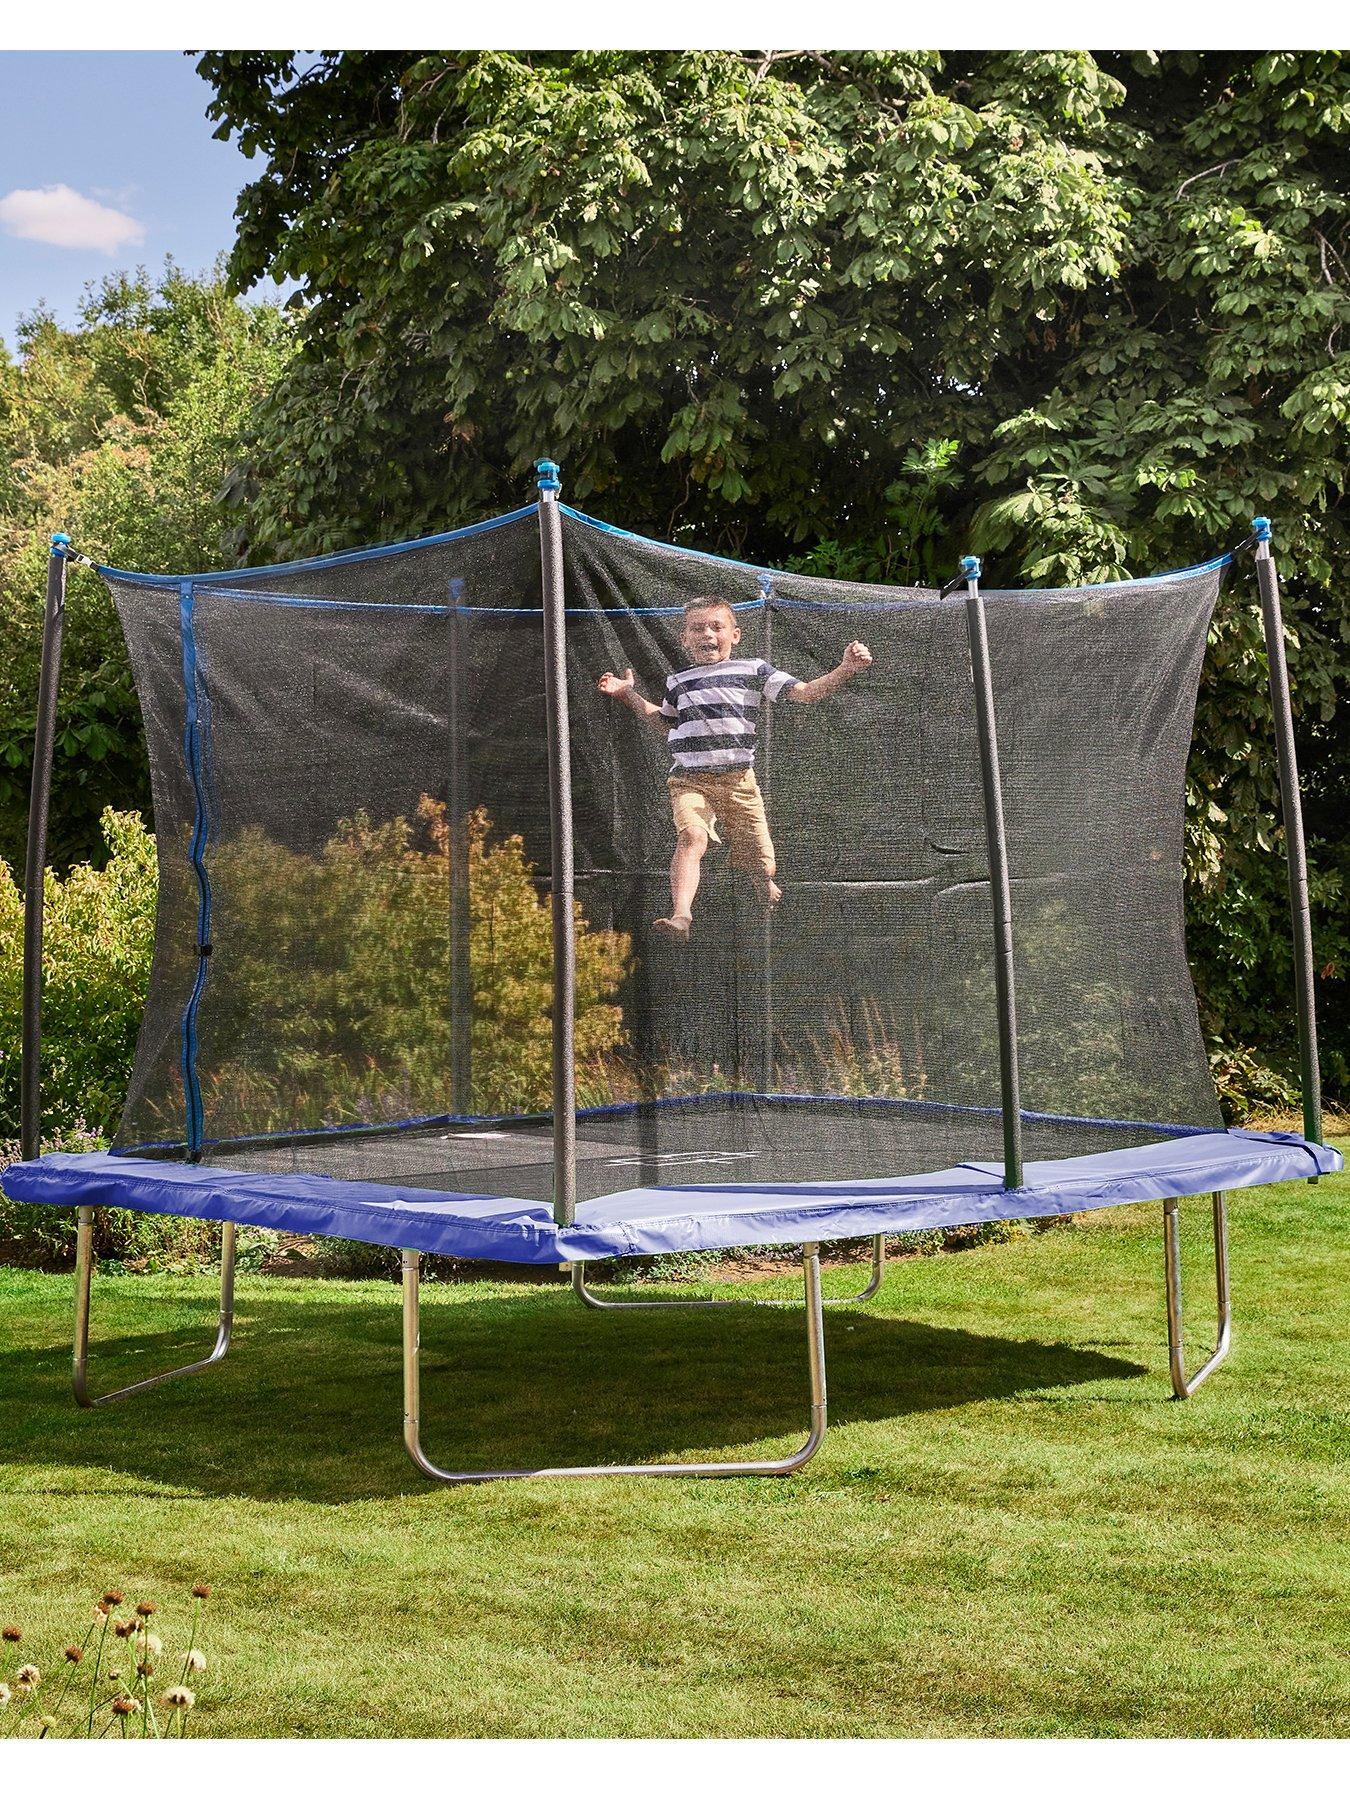 Sportspower 12ft x 8ft Bounce Pro Trampoline Enclosure Very